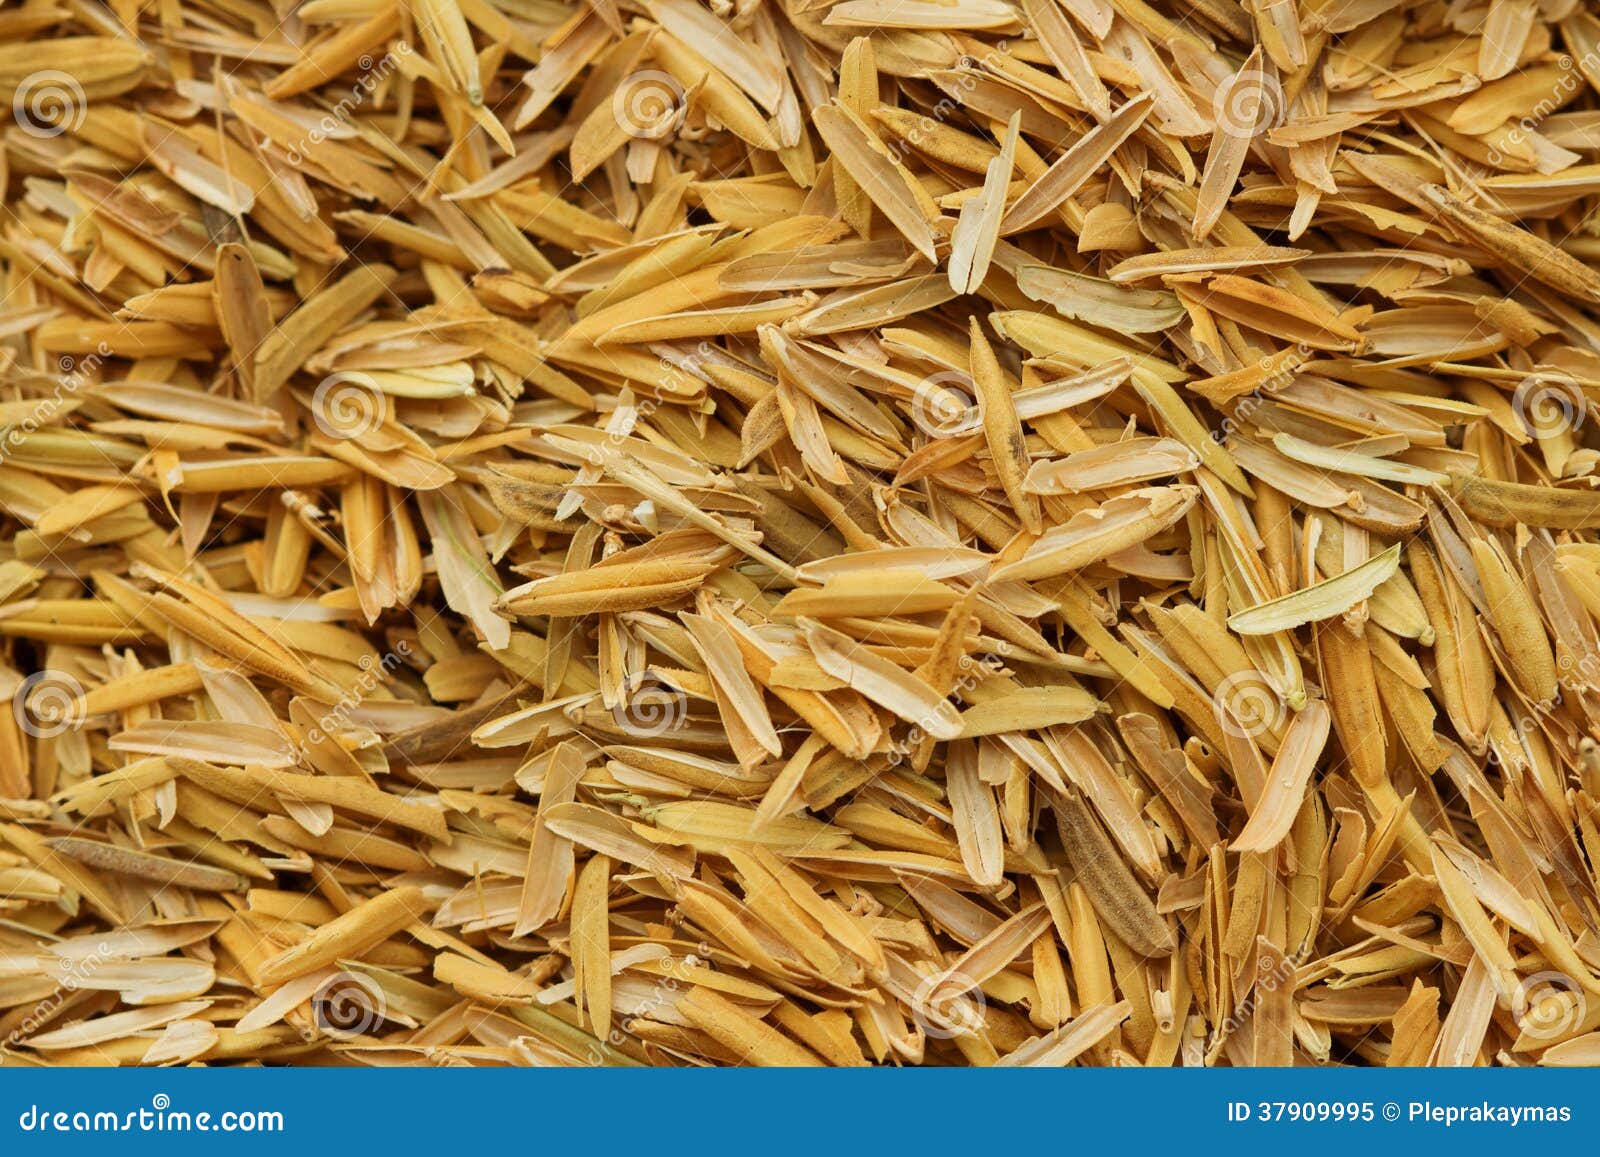 rice husk,cultivating materials